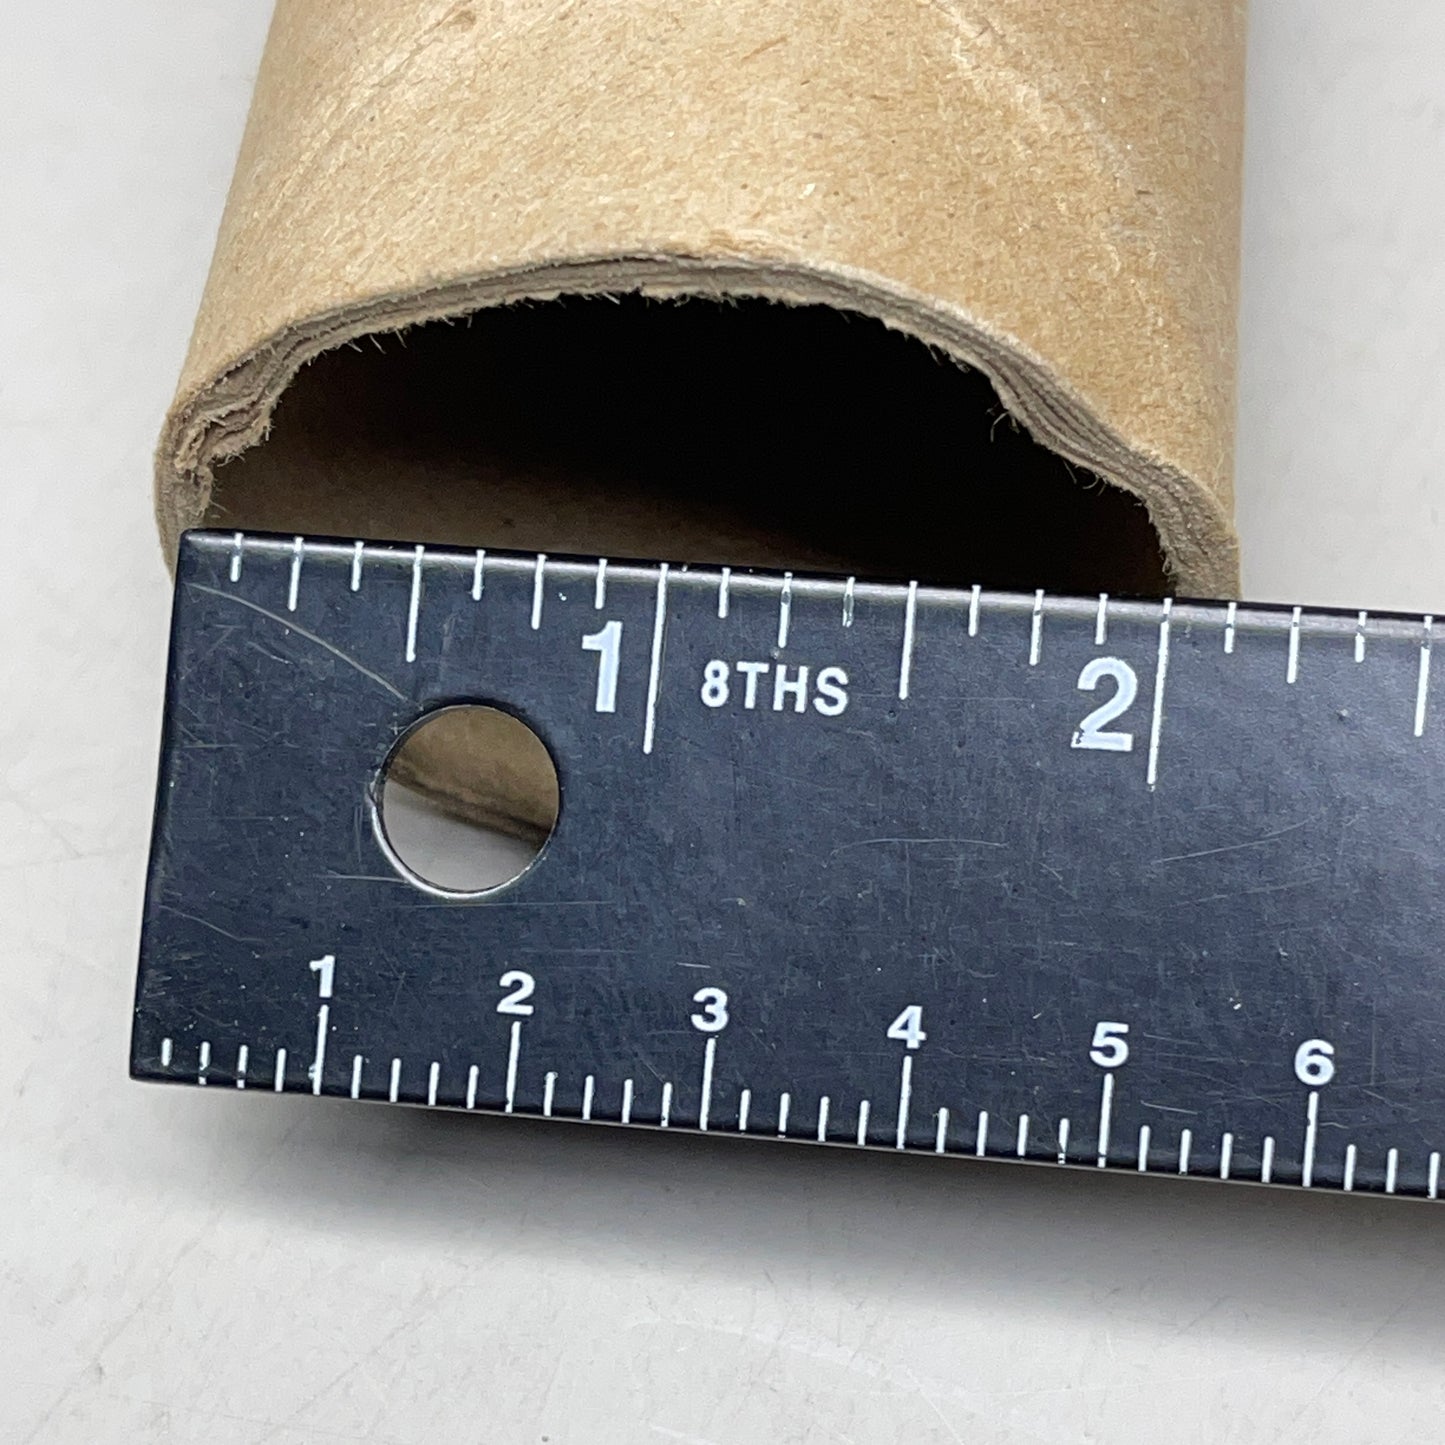 Z@ 38 PACK! Cardboard Mailing Tube or Pirate's Spyglass - YOU CHOOSE! 12” L x 2” D